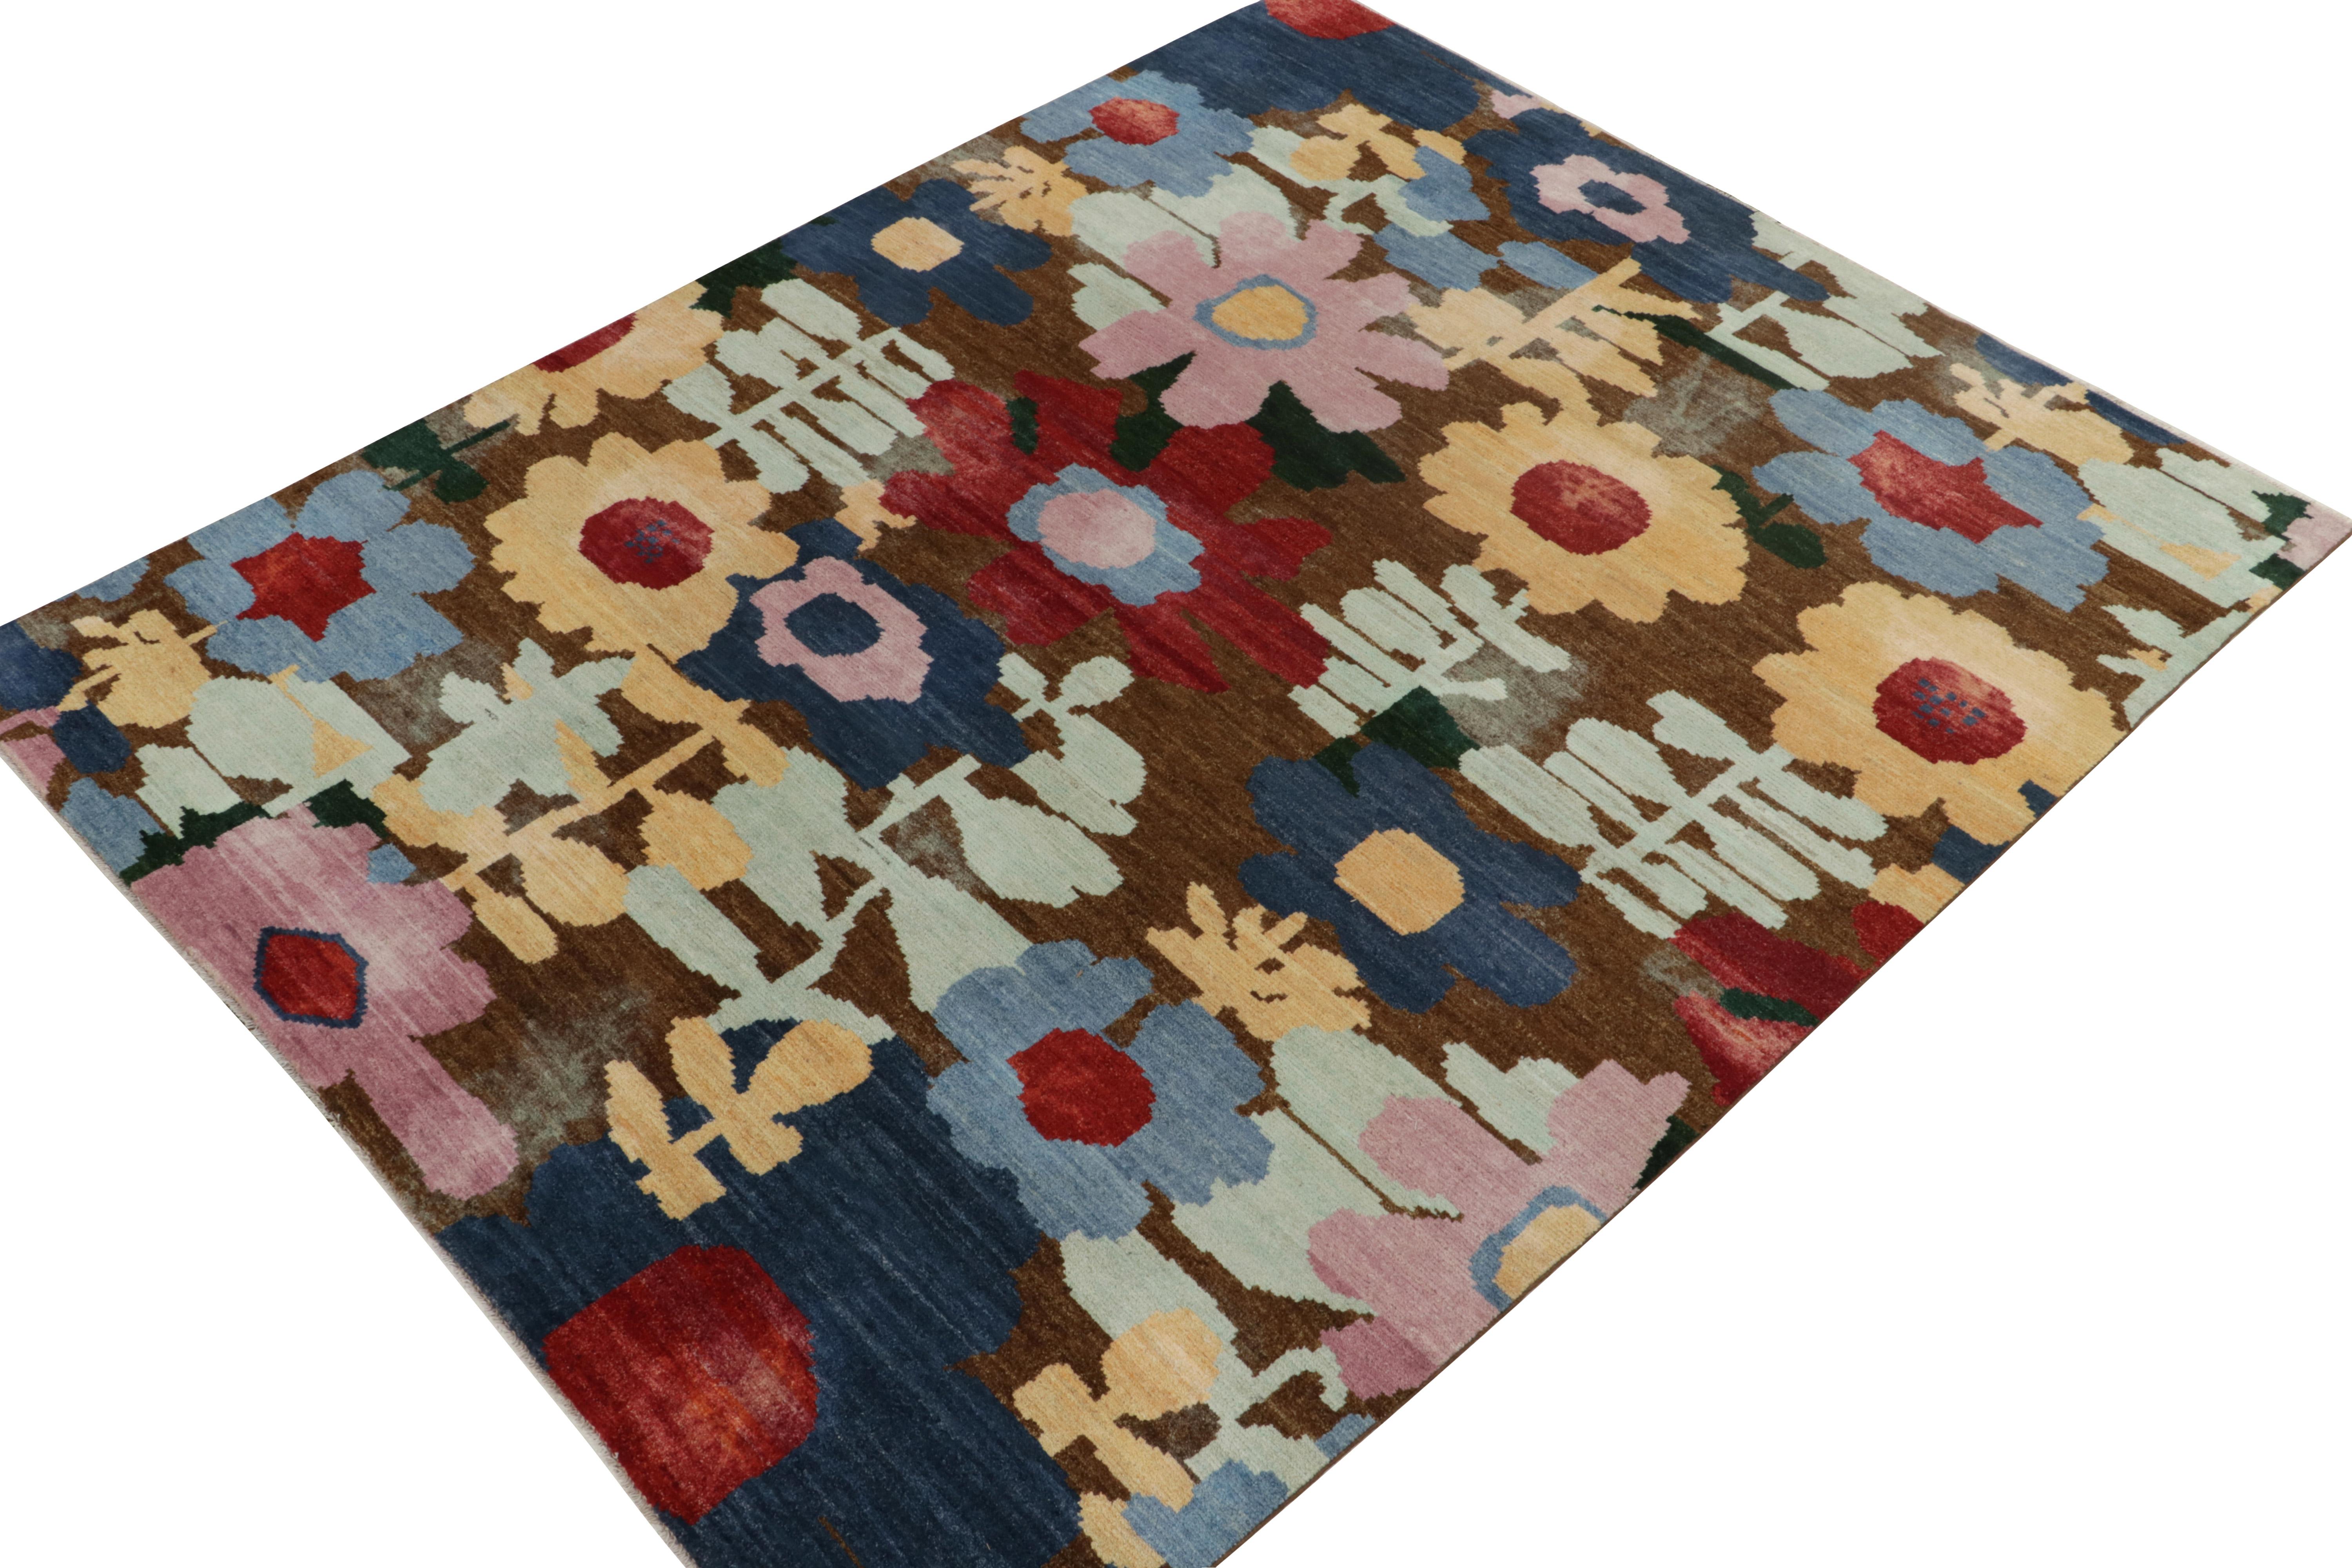 Hand-knotted in wool, an 8x10 rug from the latest unveilings of Rug & Kilim’s New & Modern Collection. 

On the Design: This refreshing piece enjoys multicolor florals for a playful take on botanical designs. The beautiful play of rich brown with